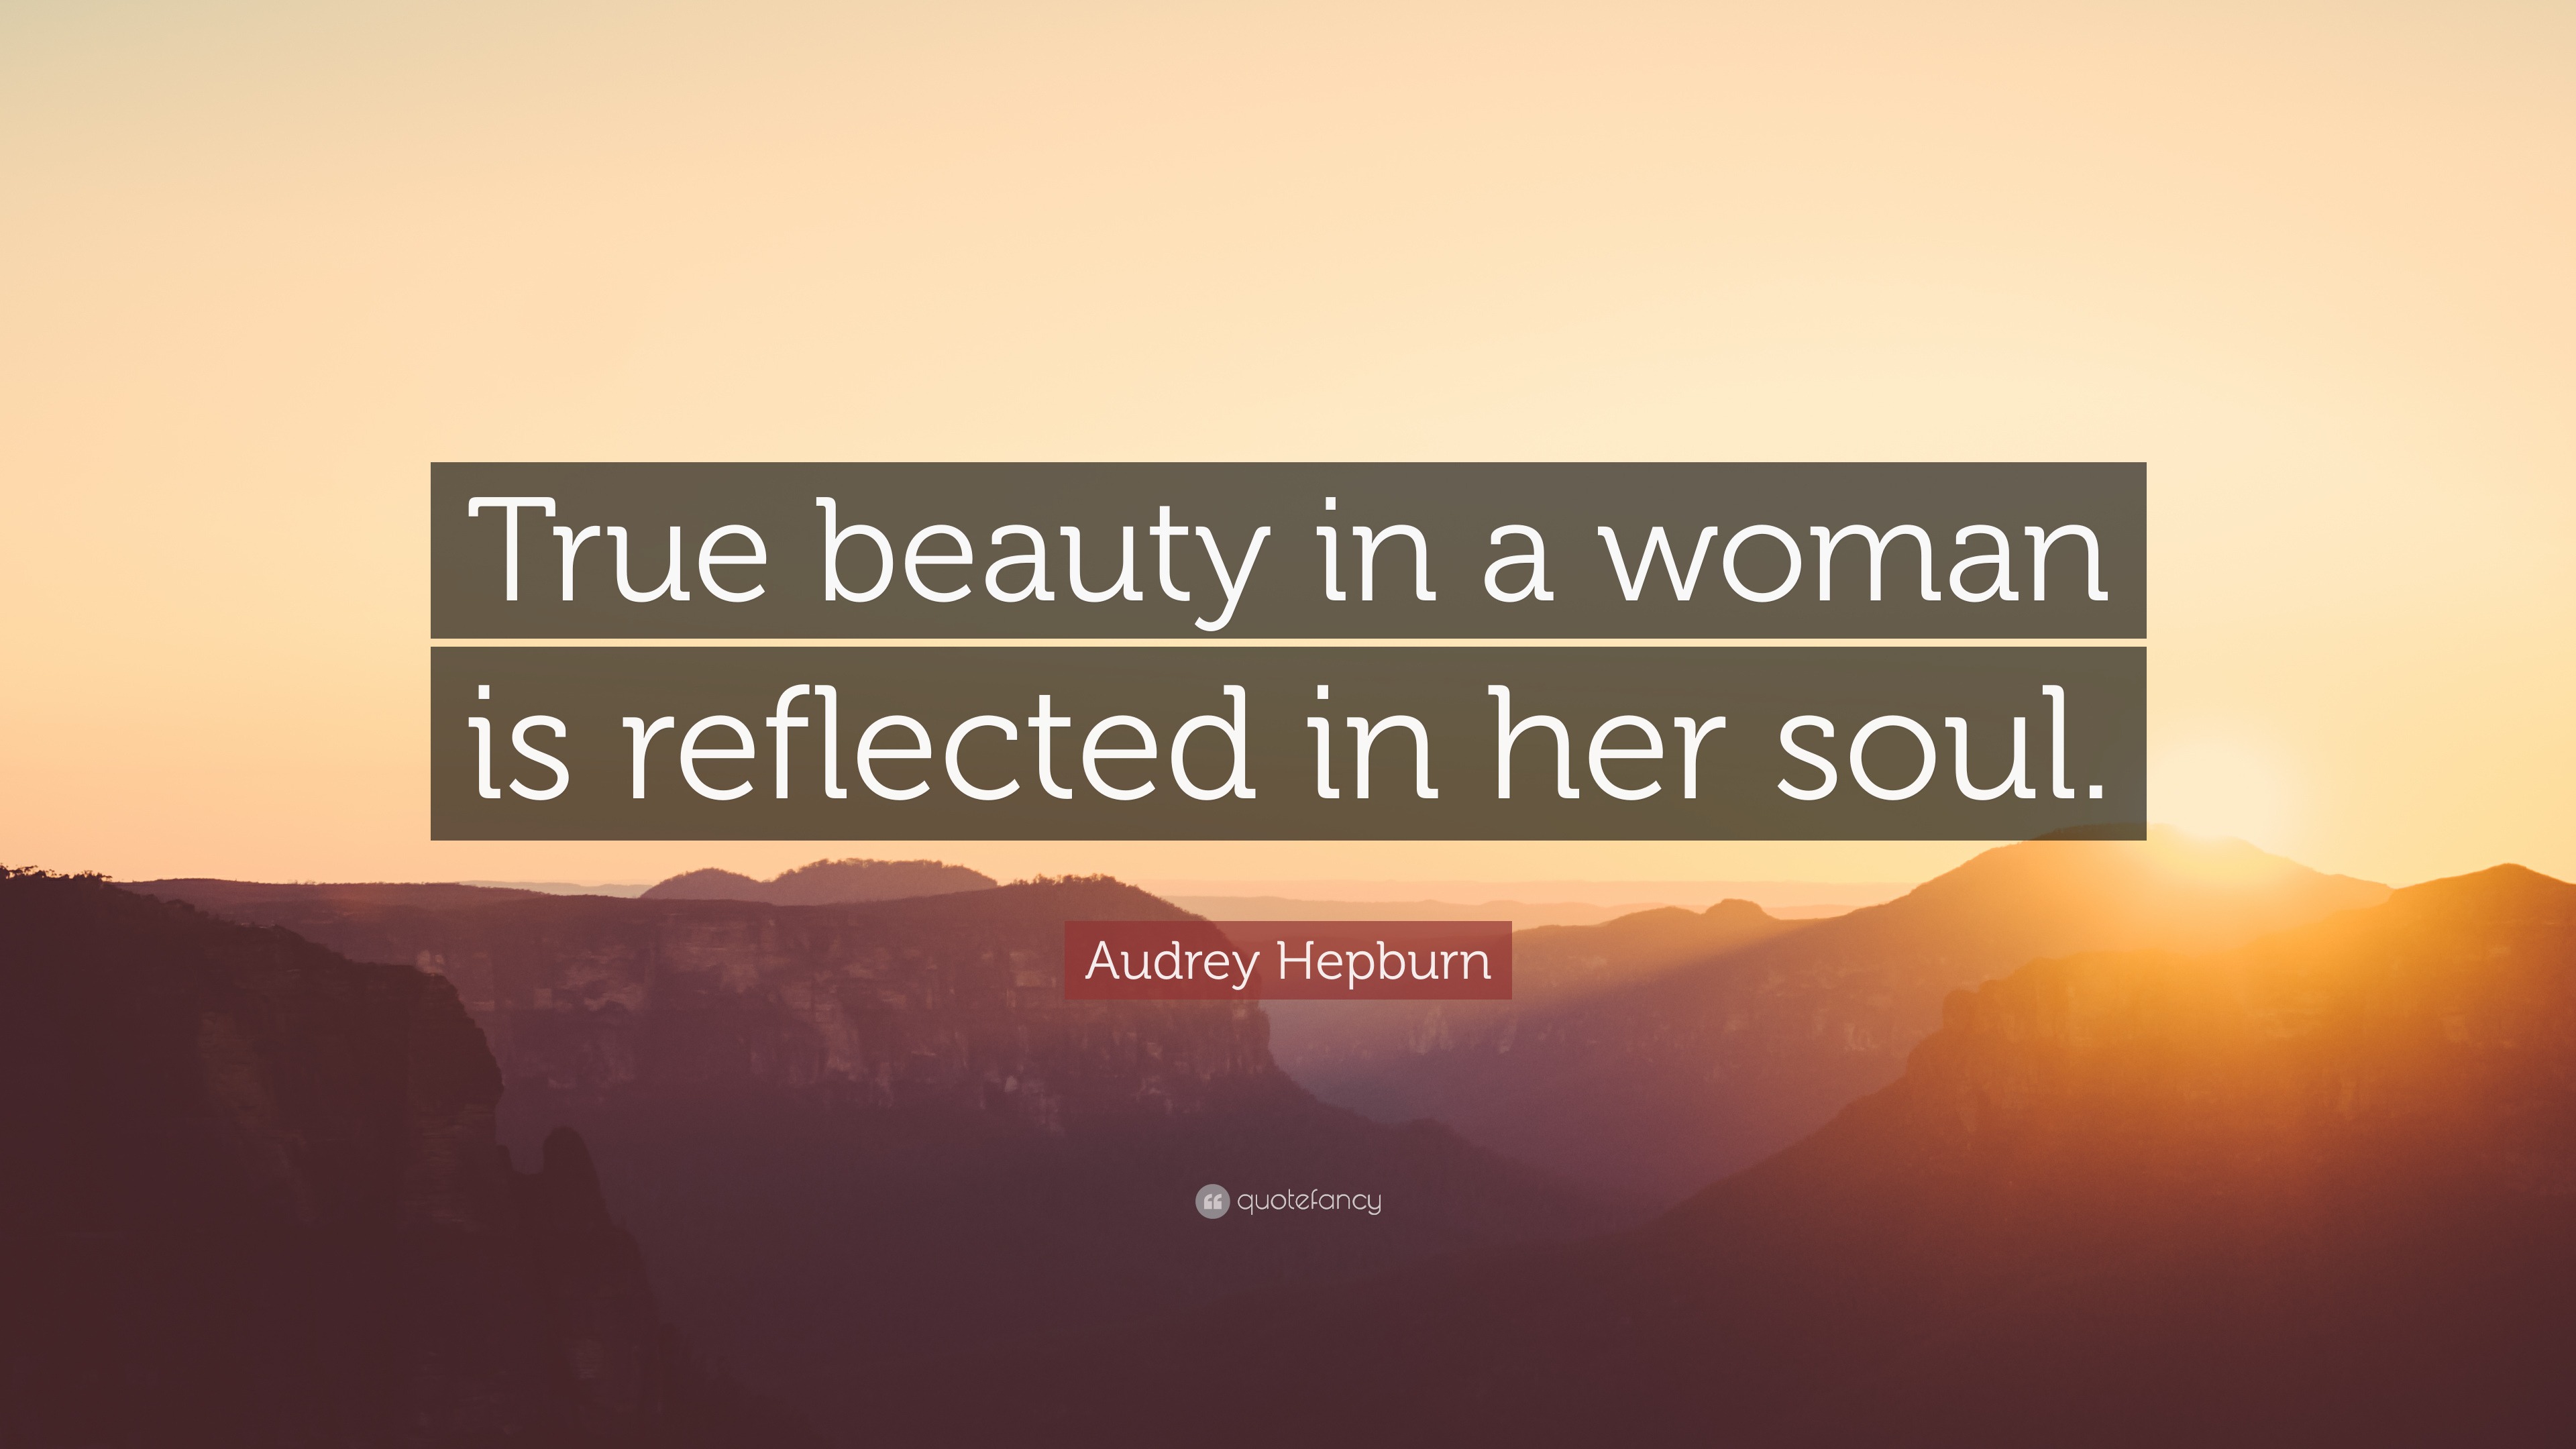 Audrey Hepburn Quote “True beauty in a woman is reflected